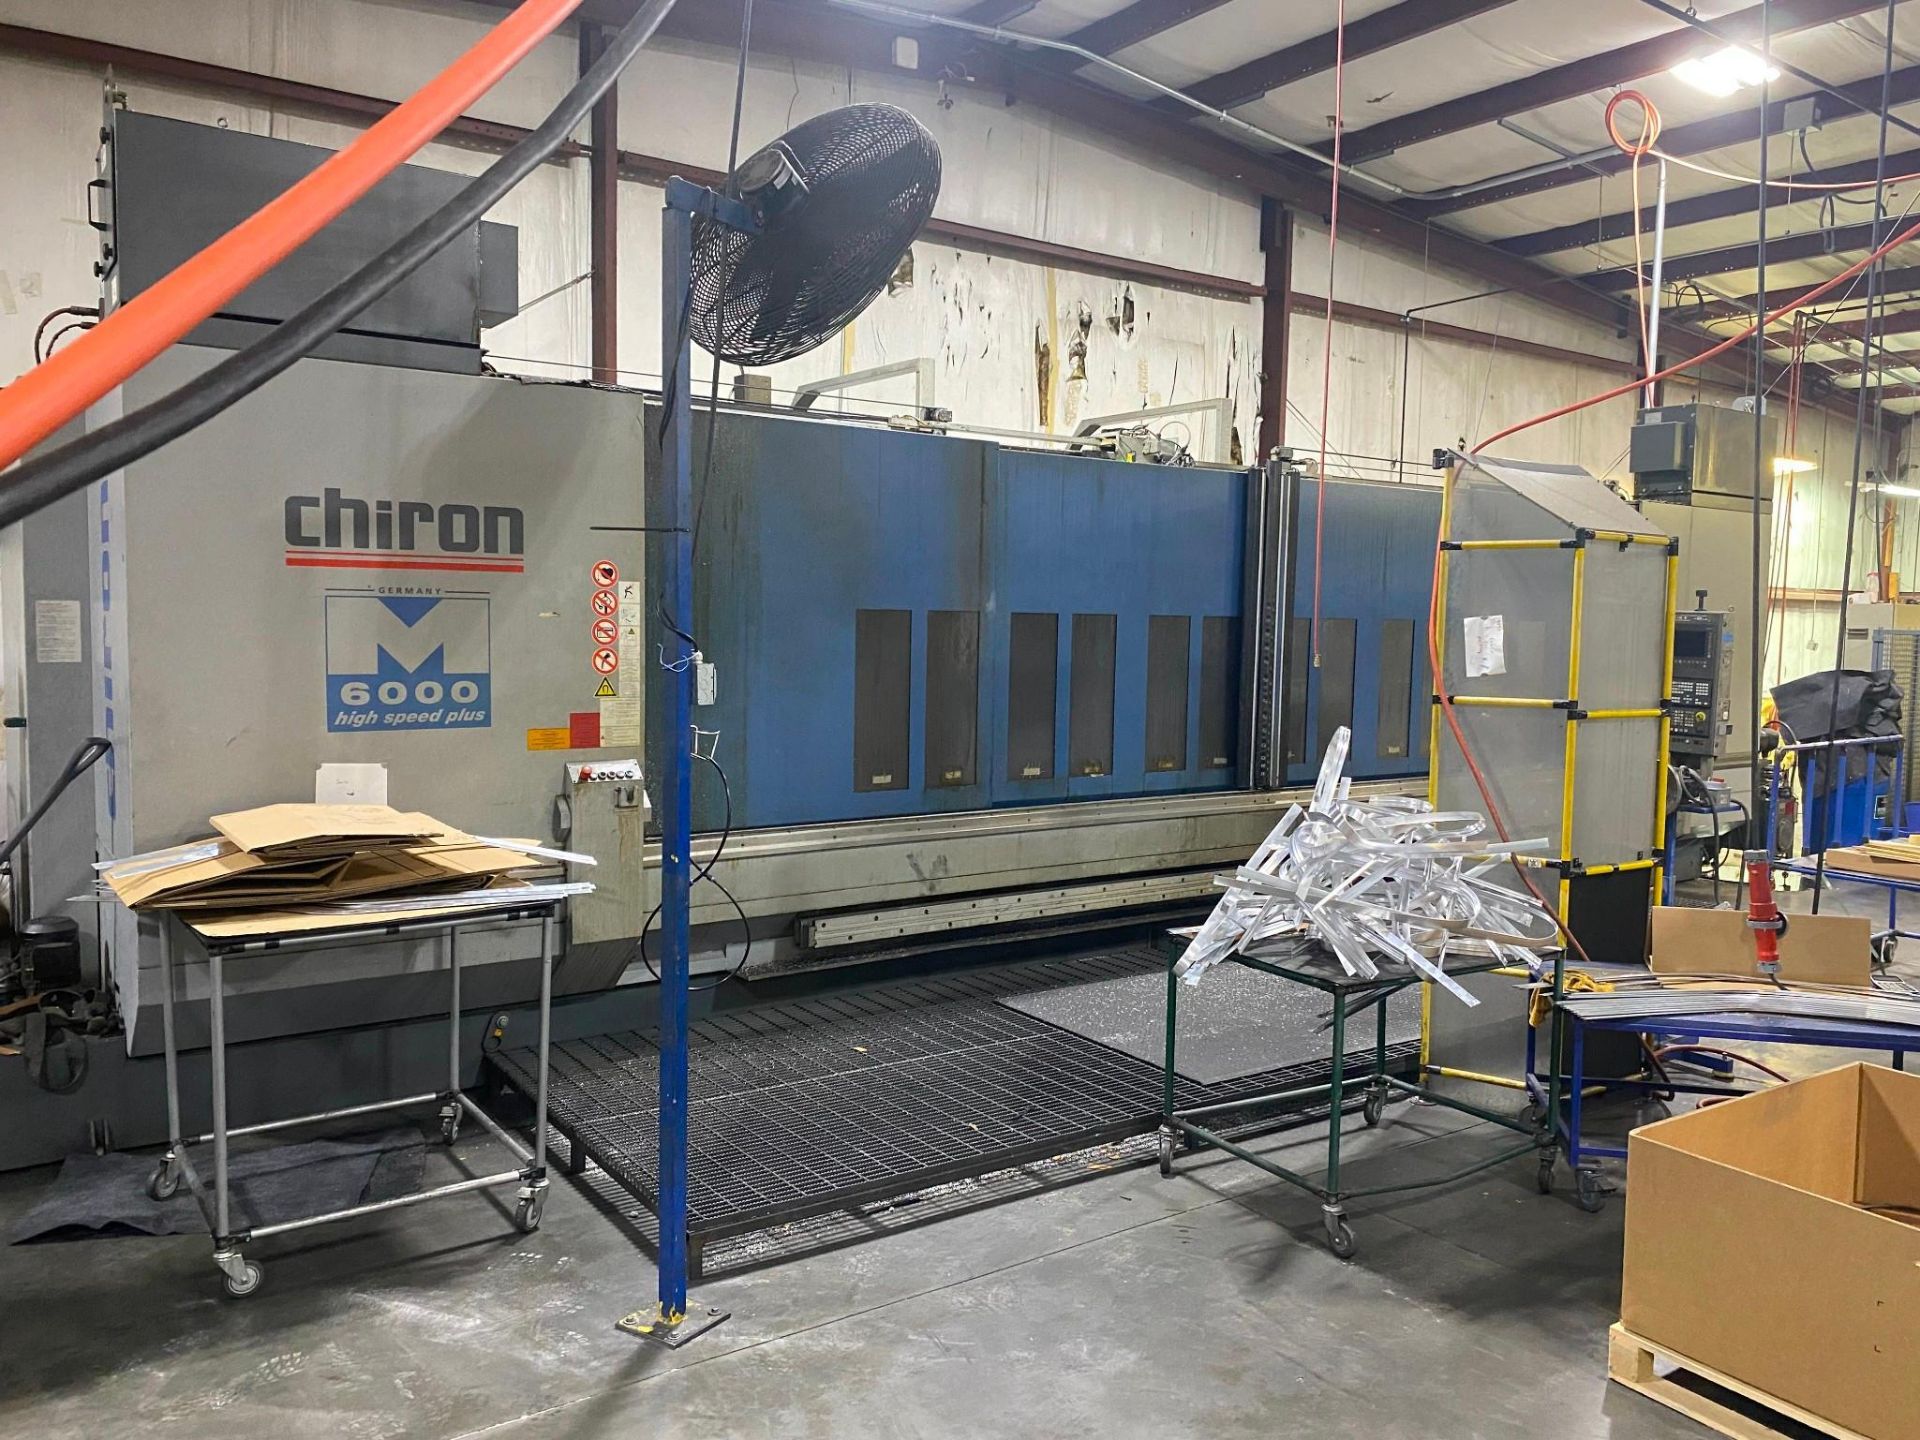 2011 CHIRON M6000 CNC VMC - 4TH AXIS & CHIP CONVEYOR INCLUDED